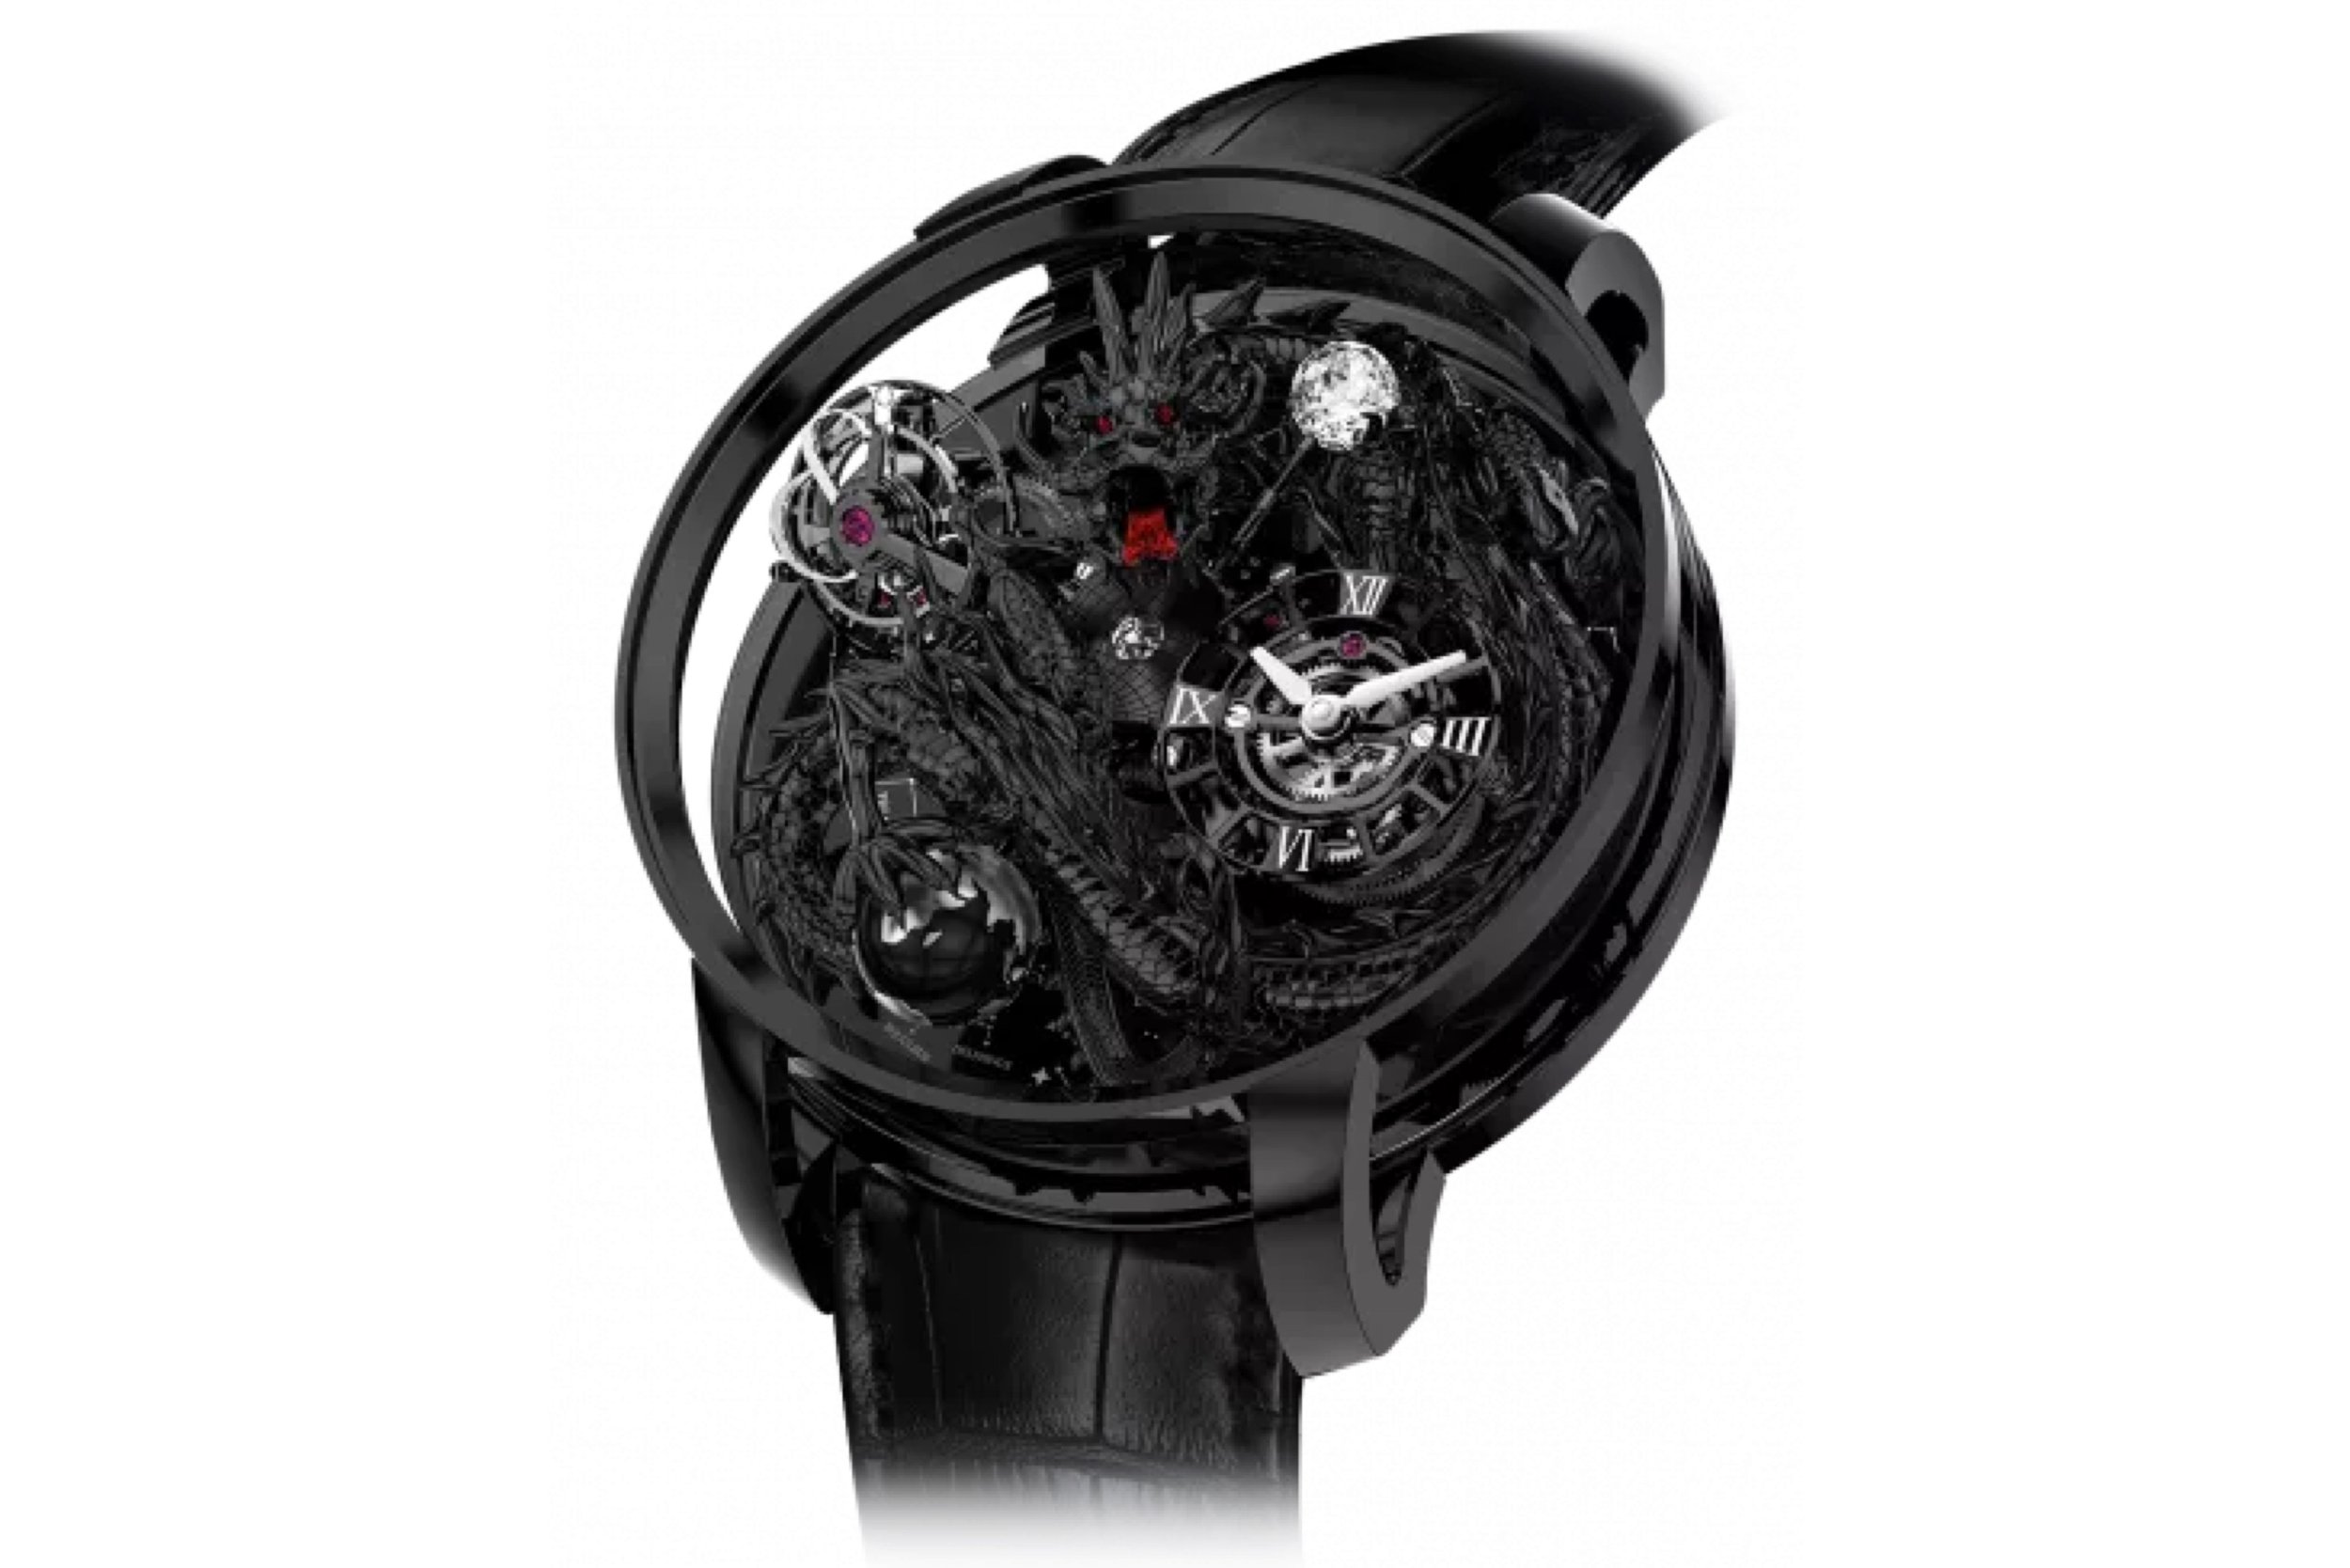 Why Every Luxury Watch Collector Needs an All-Black Timepiece